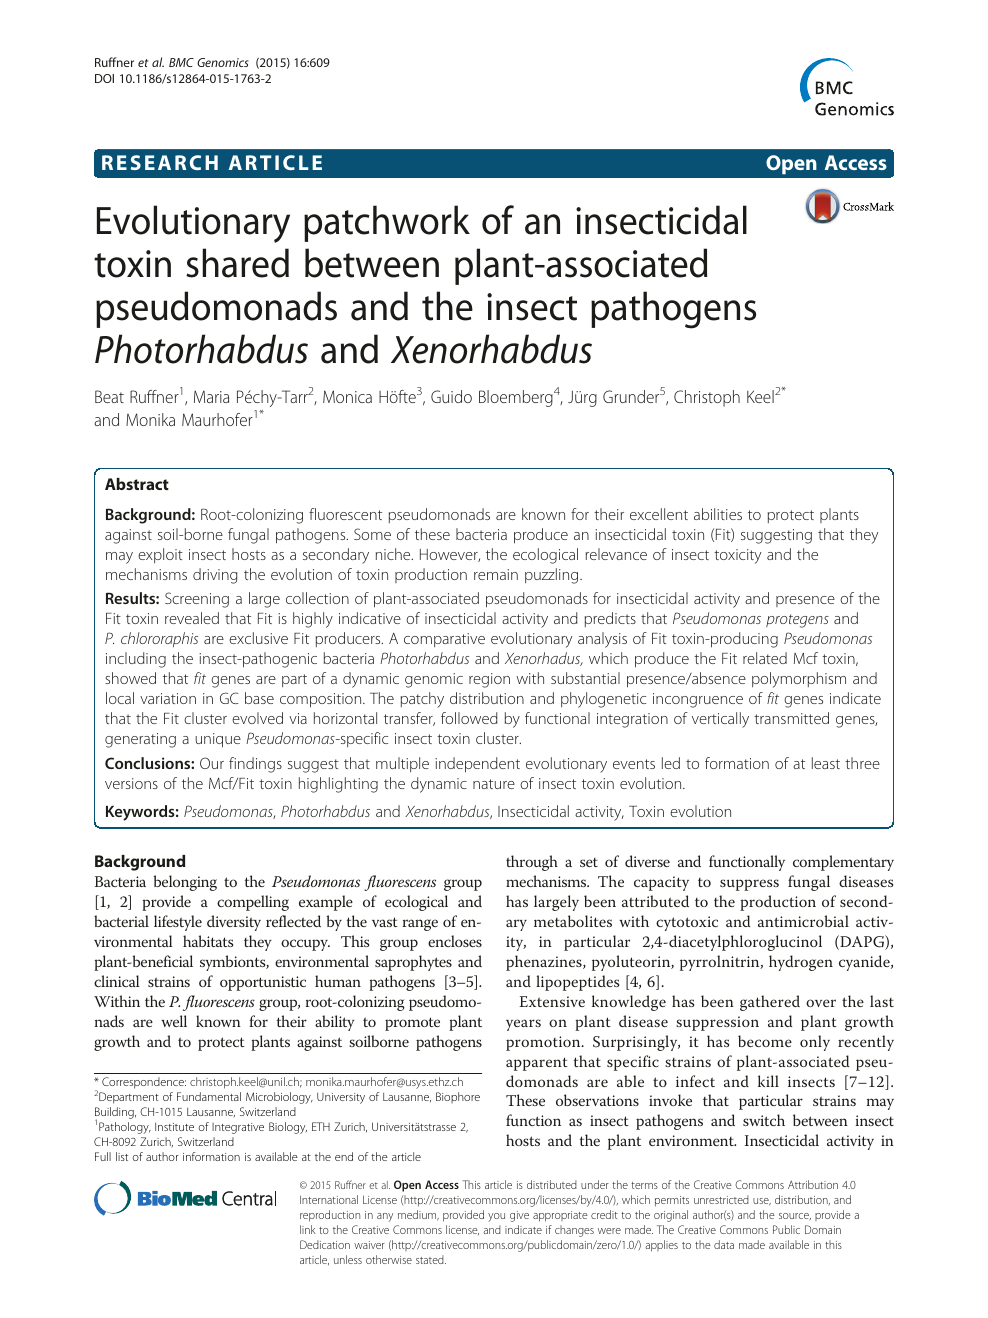 Evolutionary Patchwork Of An Insecticidal Toxin Shared Between Plant Associated Pseudomonads And The Insect Pathogens Photorhabdus And Xenorhabdus Topic Of Research Paper In Biological Sciences Download Scholarly Article Pdf And Read For